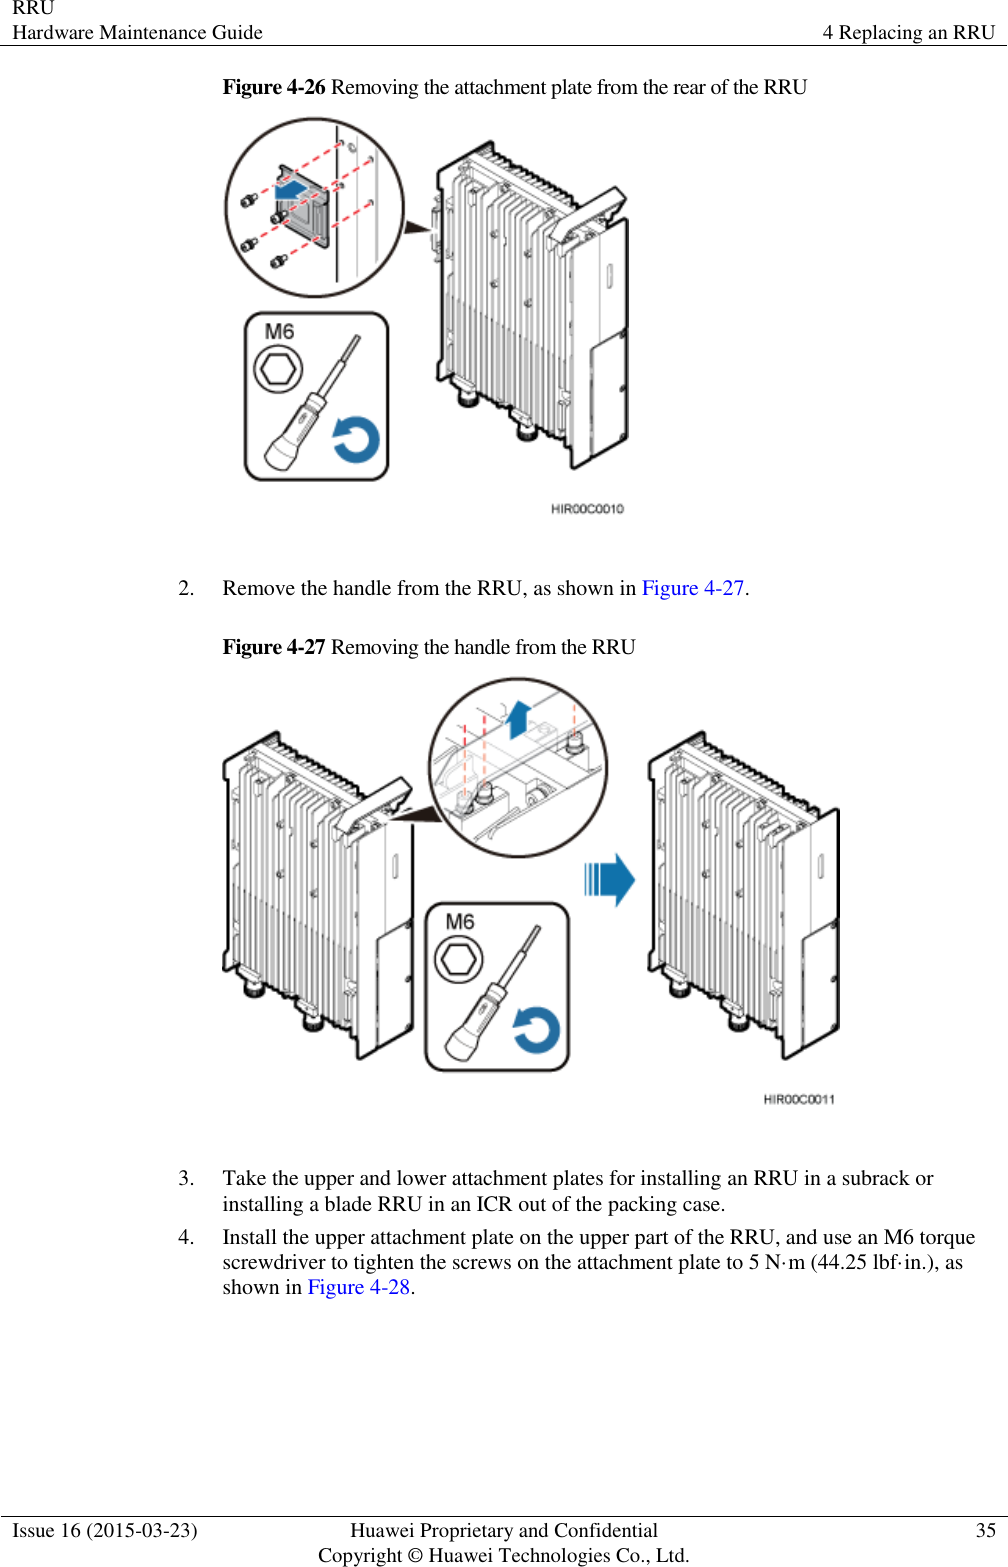 RRU Hardware Maintenance Guide 4 Replacing an RRU  Issue 16 (2015-03-23) Huawei Proprietary and Confidential                                     Copyright © Huawei Technologies Co., Ltd. 35  Figure 4-26 Removing the attachment plate from the rear of the RRU   2. Remove the handle from the RRU, as shown in Figure 4-27. Figure 4-27 Removing the handle from the RRU   3. Take the upper and lower attachment plates for installing an RRU in a subrack or installing a blade RRU in an ICR out of the packing case. 4. Install the upper attachment plate on the upper part of the RRU, and use an M6 torque screwdriver to tighten the screws on the attachment plate to 5 N·m (44.25 lbf·in.), as shown in Figure 4-28. 